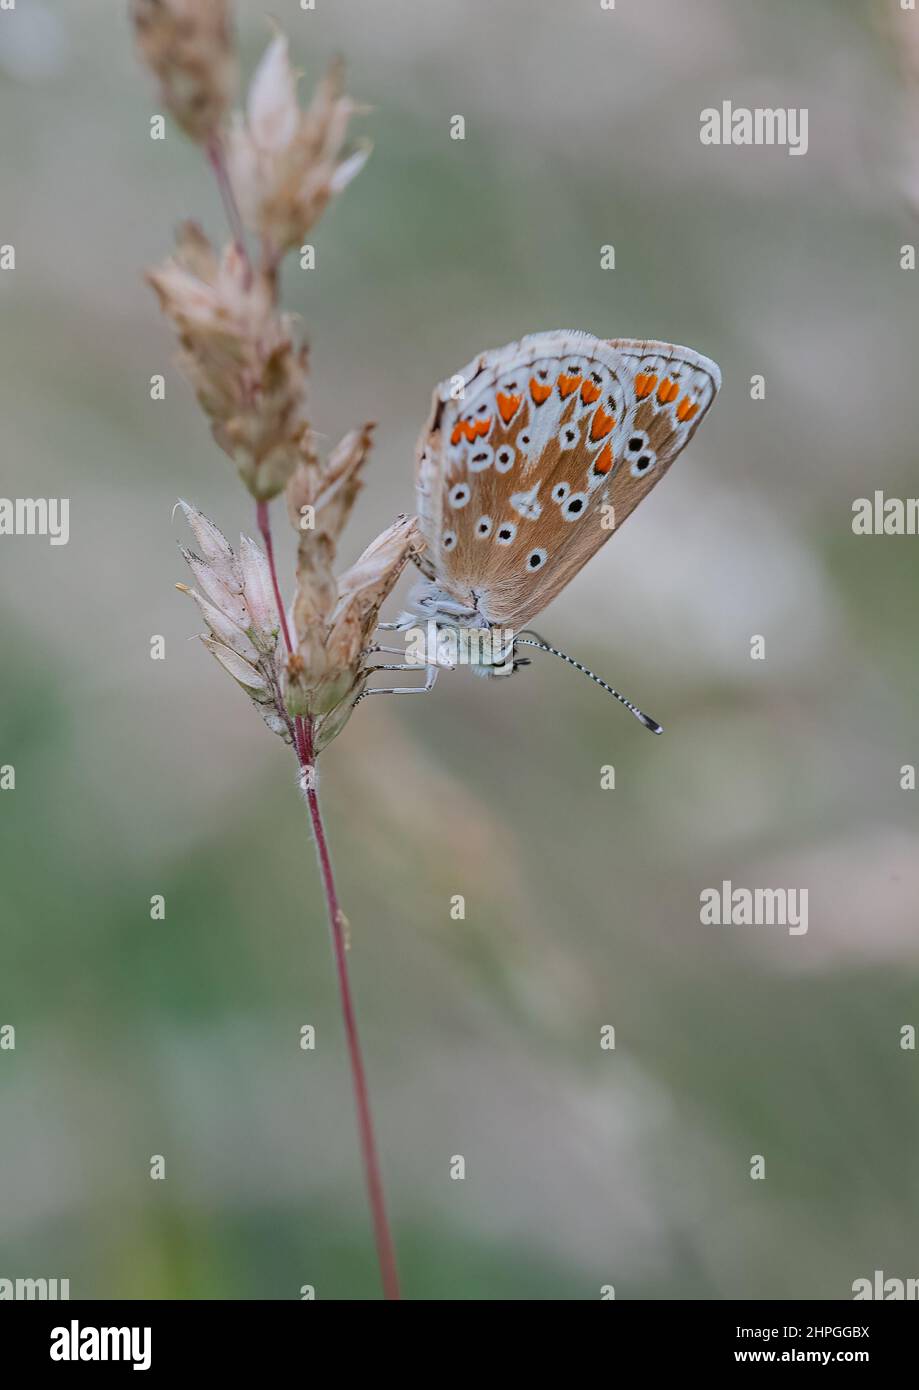 A Brown Argus butterfly, showing it's underside, perched on a stem of grass on the edge of a woodland ride. Suffolk, UK. Stock Photo